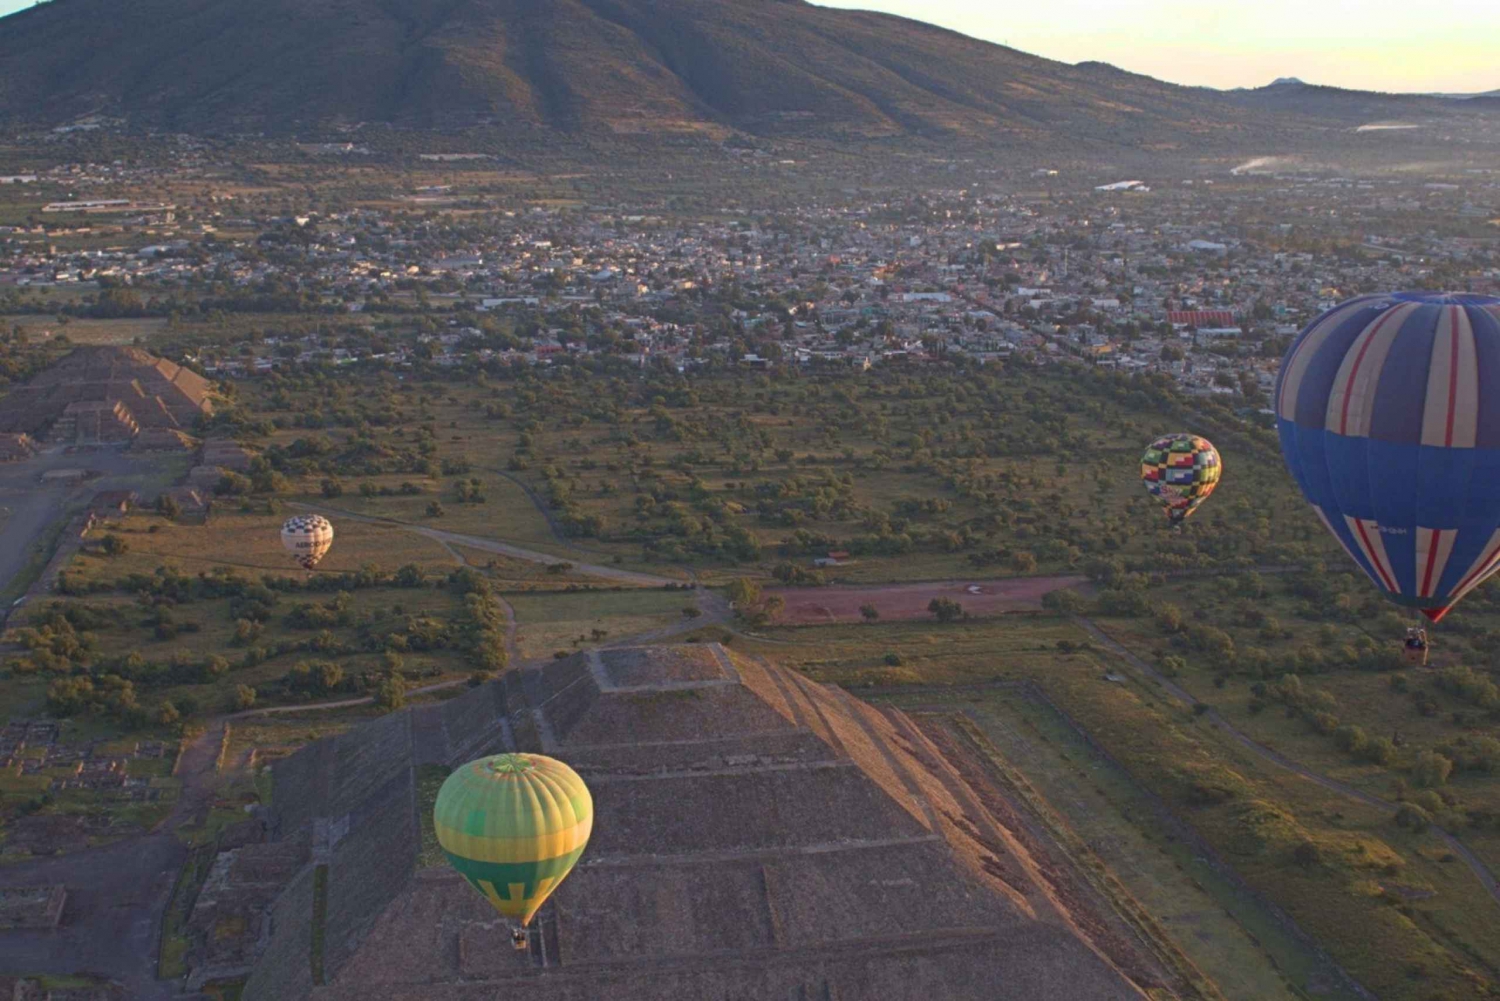 Balloon Flight and Teotihuacan Tour with Breakfast from CDMX